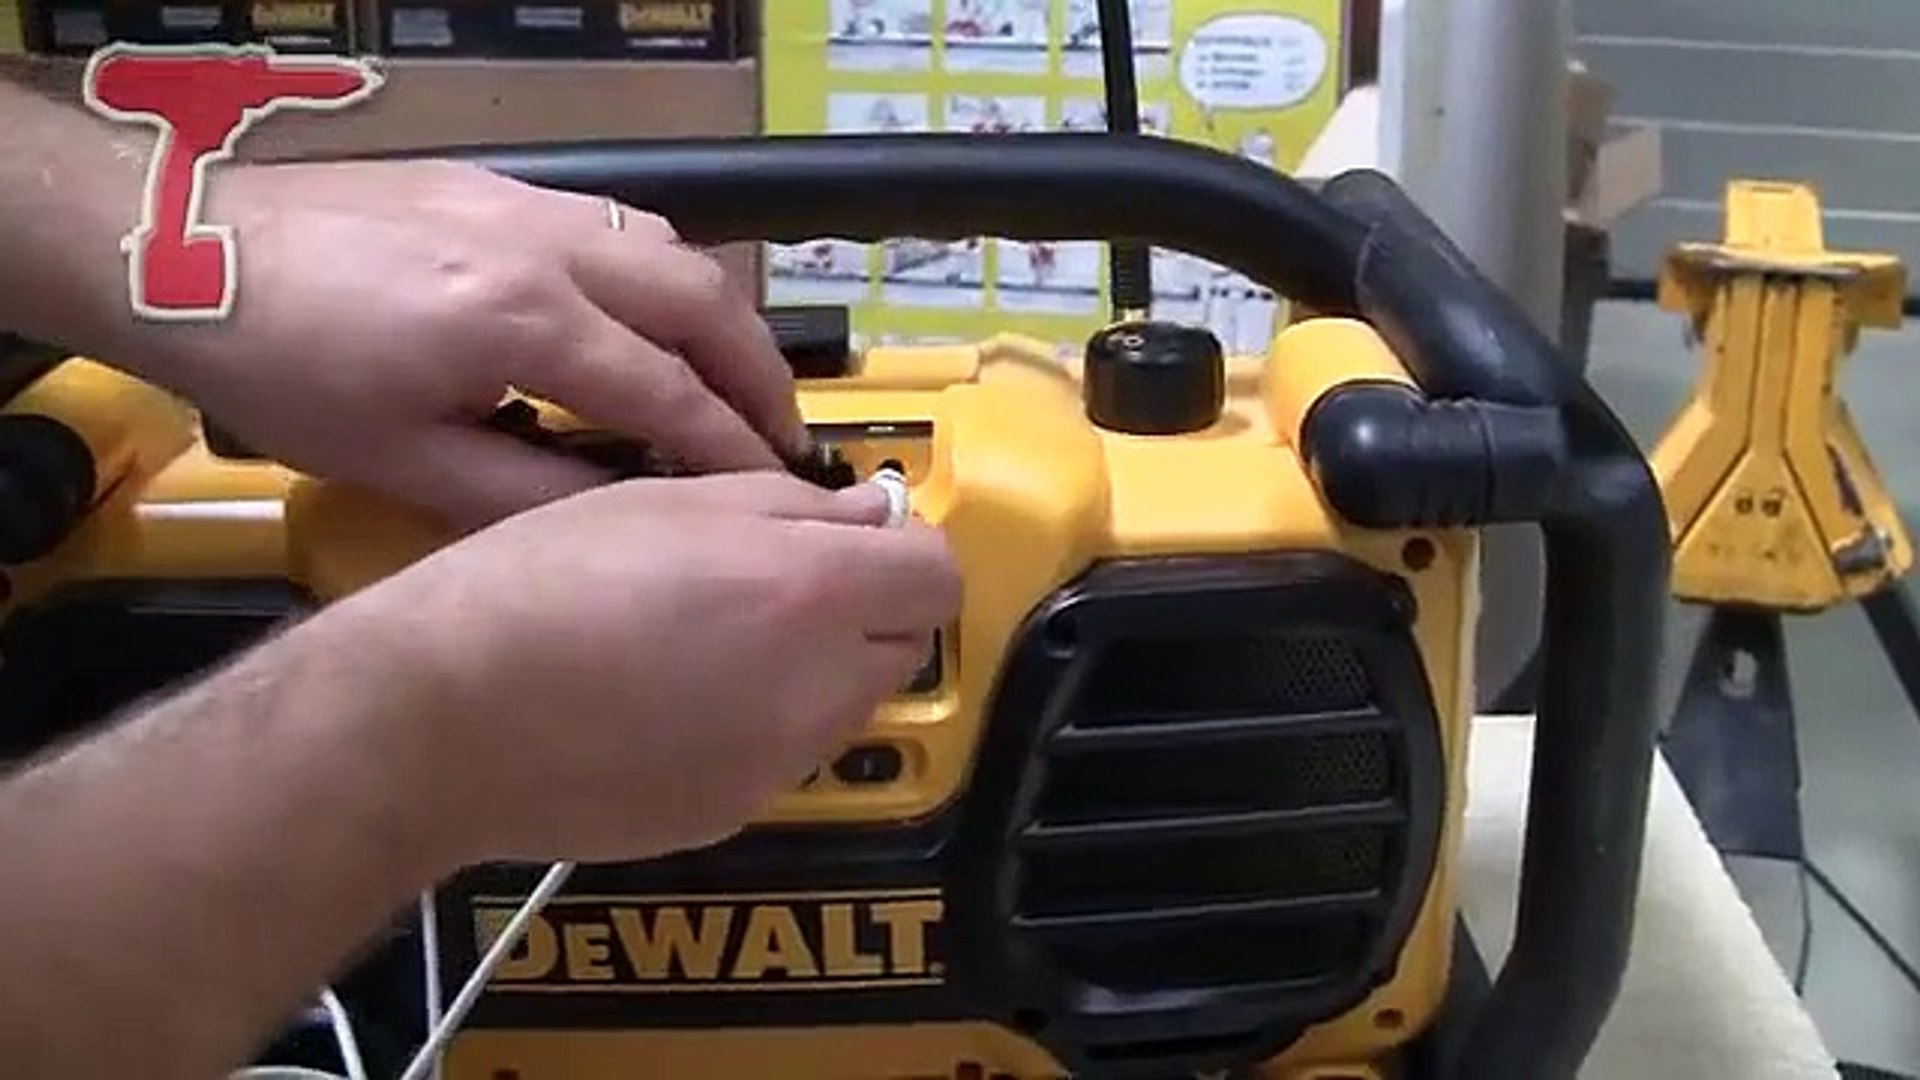 DeWalt DC013 Cordless/Corded Radio Charger - video Dailymotion